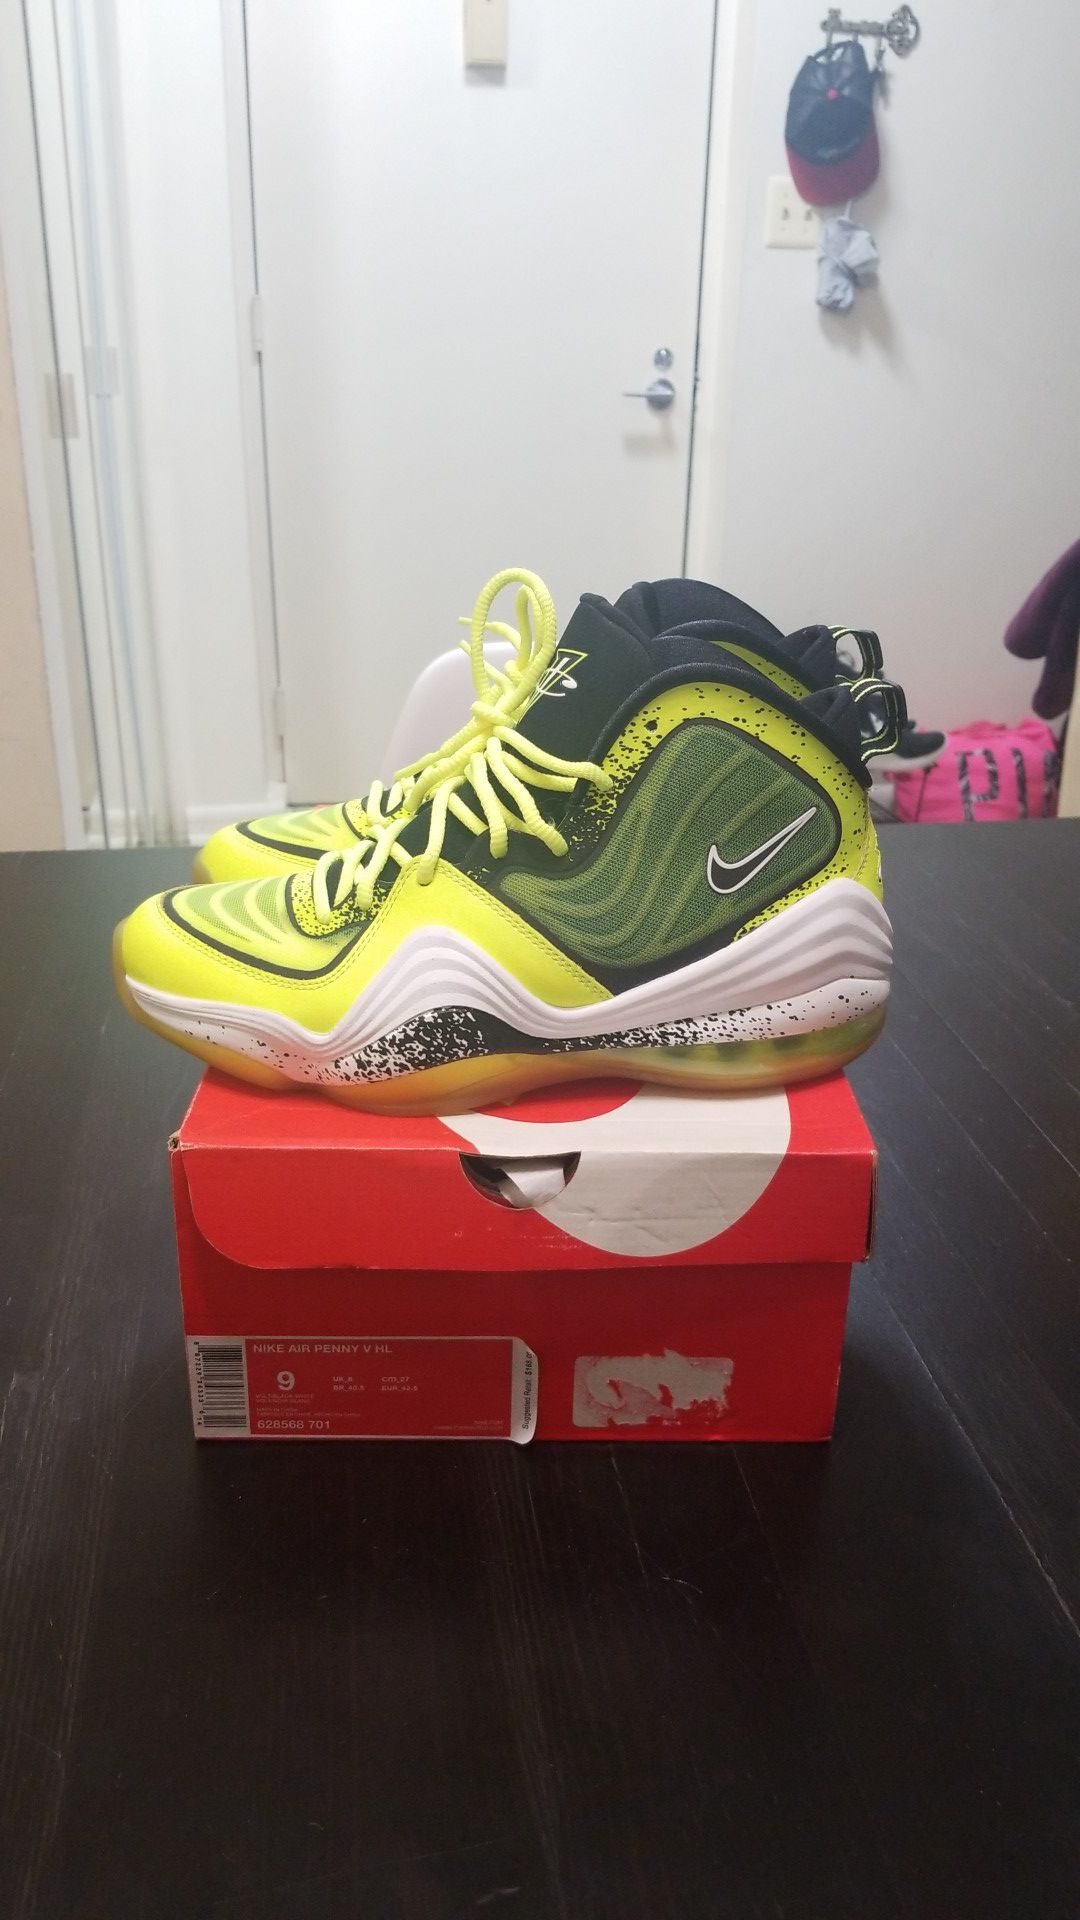 Nike penny 5 highlighter size 9